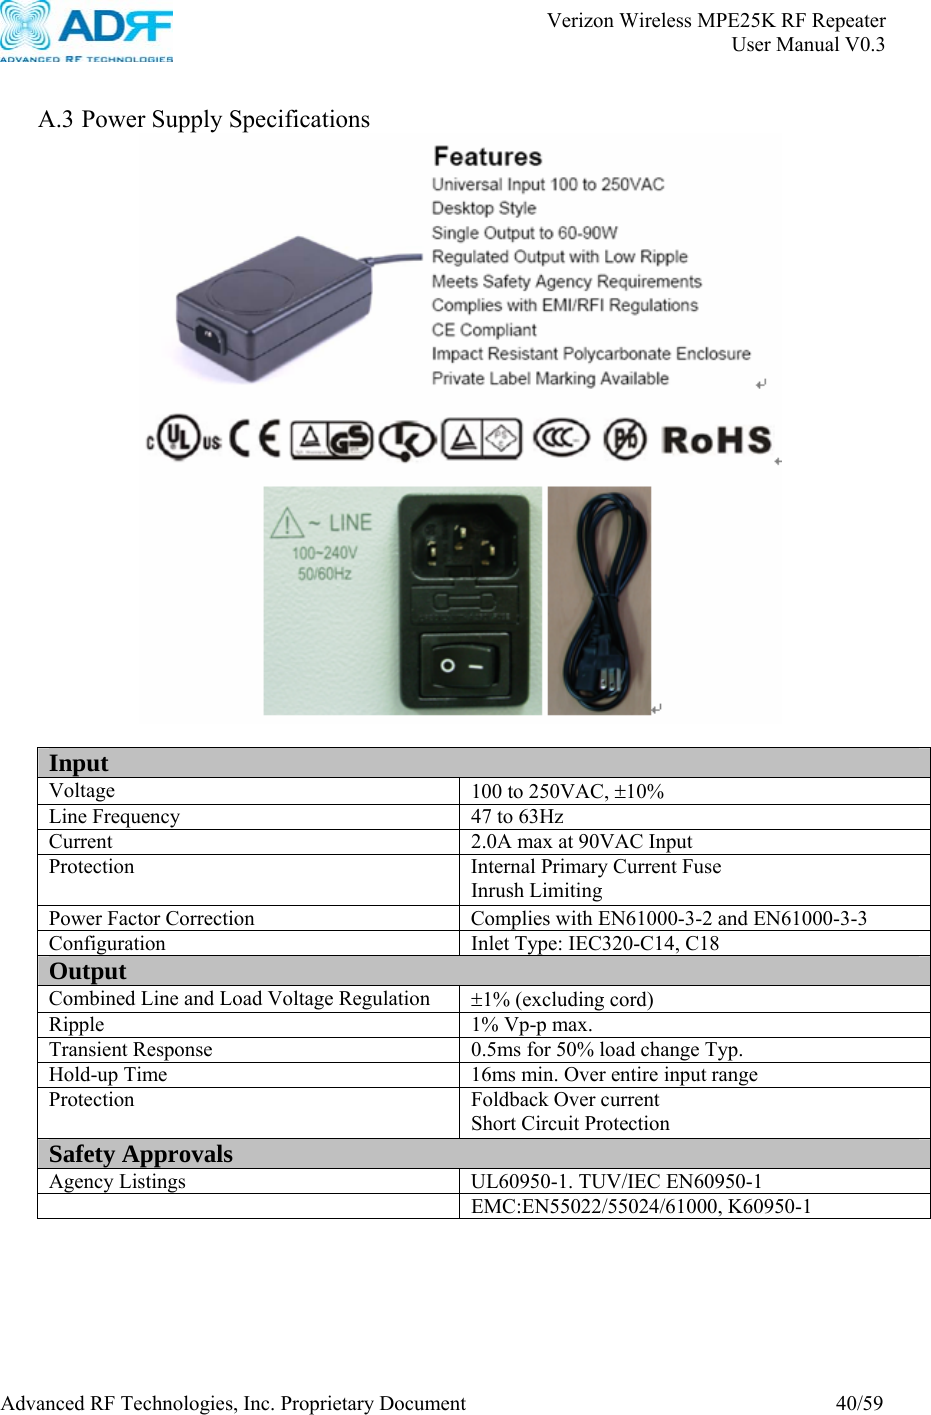       Verizon Wireless MPE25K RF Repeater   User Manual V0.3 Advanced RF Technologies, Inc. Proprietary Document  40/59  A.3 Power Supply Specifications   Input Voltage  100 to 250VAC, ±10% Line Frequency  47 to 63Hz Current  2.0A max at 90VAC Input Protection  Internal Primary Current Fuse Inrush Limiting Power Factor Correction  Complies with EN61000-3-2 and EN61000-3-3 Configuration  Inlet Type: IEC320-C14, C18 Output Combined Line and Load Voltage Regulation  ±1% (excluding cord) Ripple 1% Vp-p max. Transient Response  0.5ms for 50% load change Typ. Hold-up Time  16ms min. Over entire input range Protection Foldback Over current Short Circuit Protection Safety Approvals Agency Listings  UL60950-1. TUV/IEC EN60950-1  EMC:EN55022/55024/61000, K60950-1  